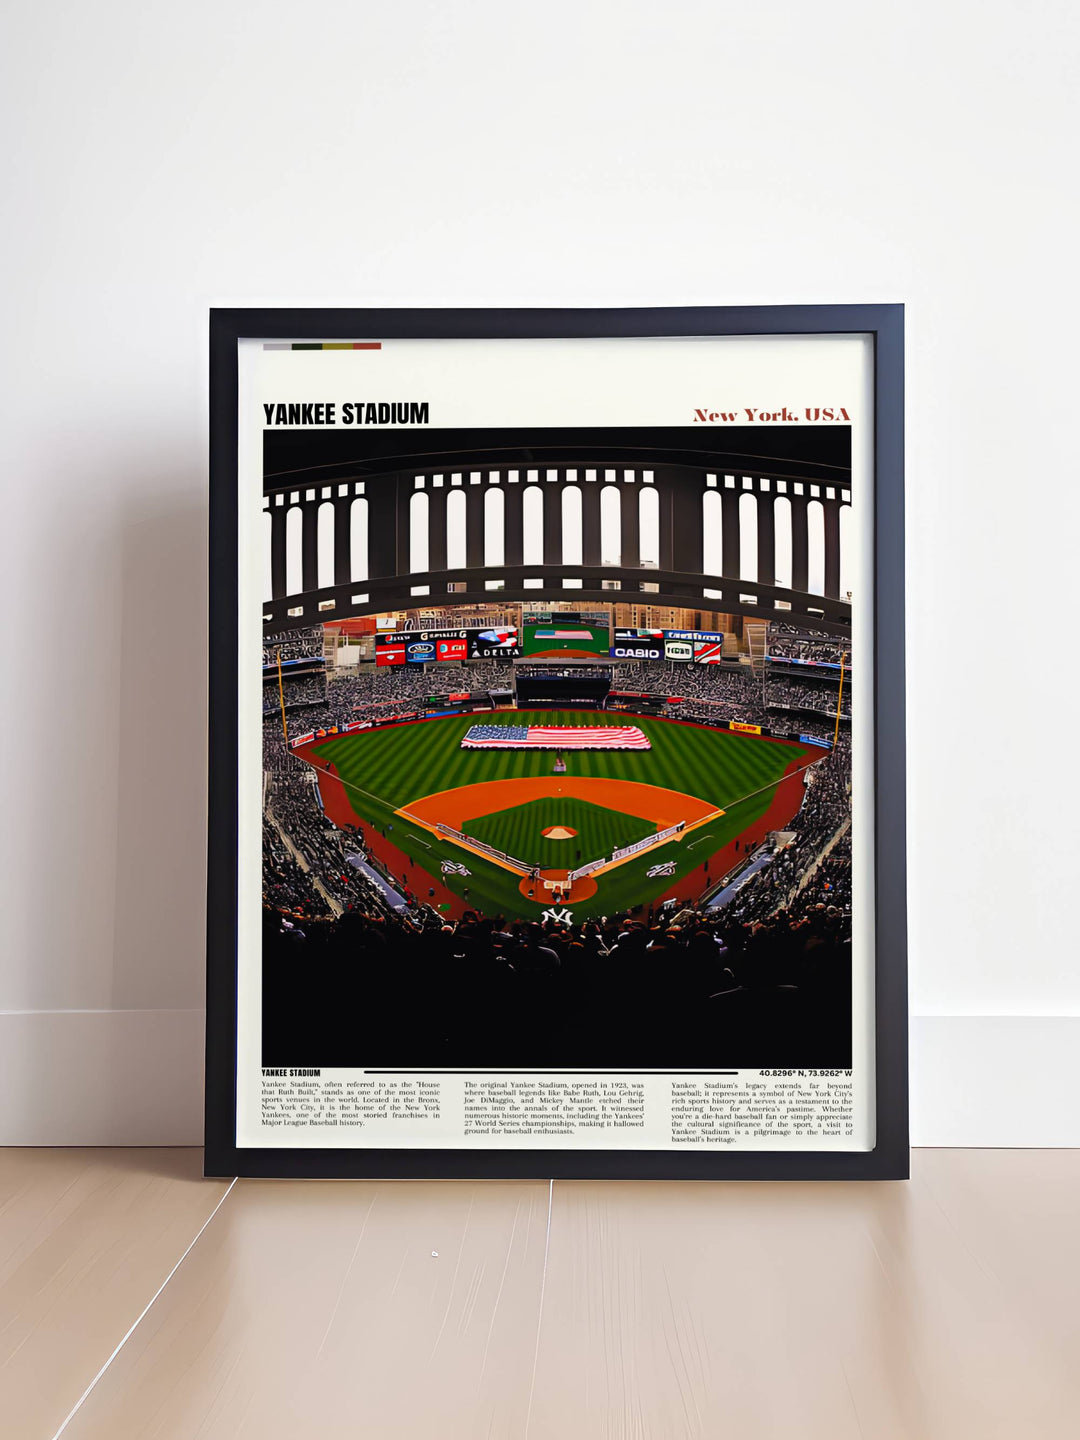 Classic poster of Yankee Stadium under a clear blue sky, a serene addition to any living space or office.